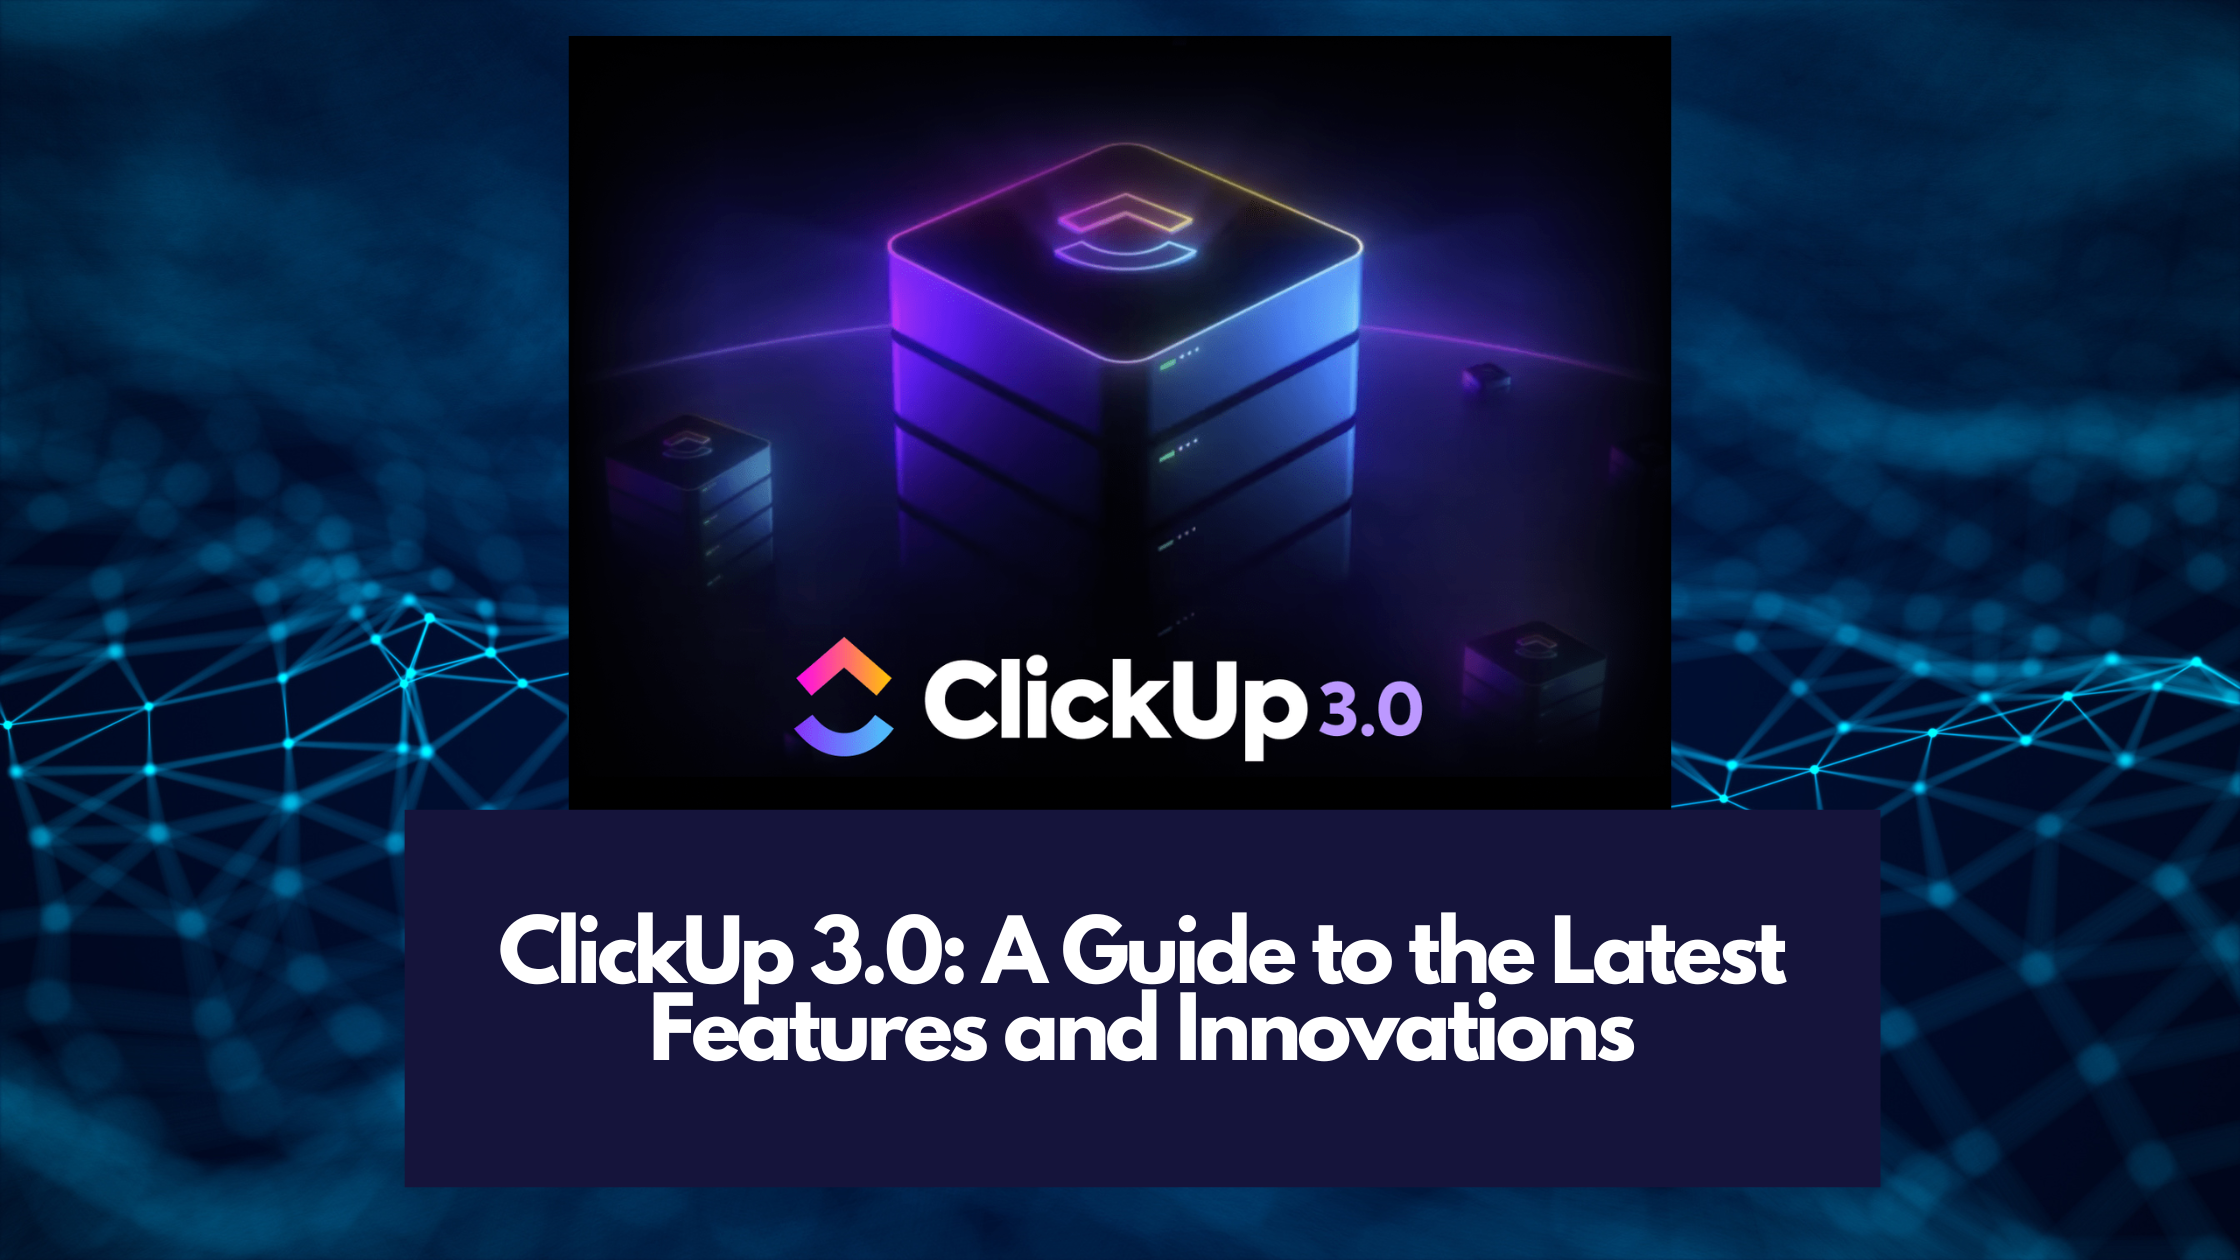 ClickUp 3.0: A Guide to the Latest Features and Innovations